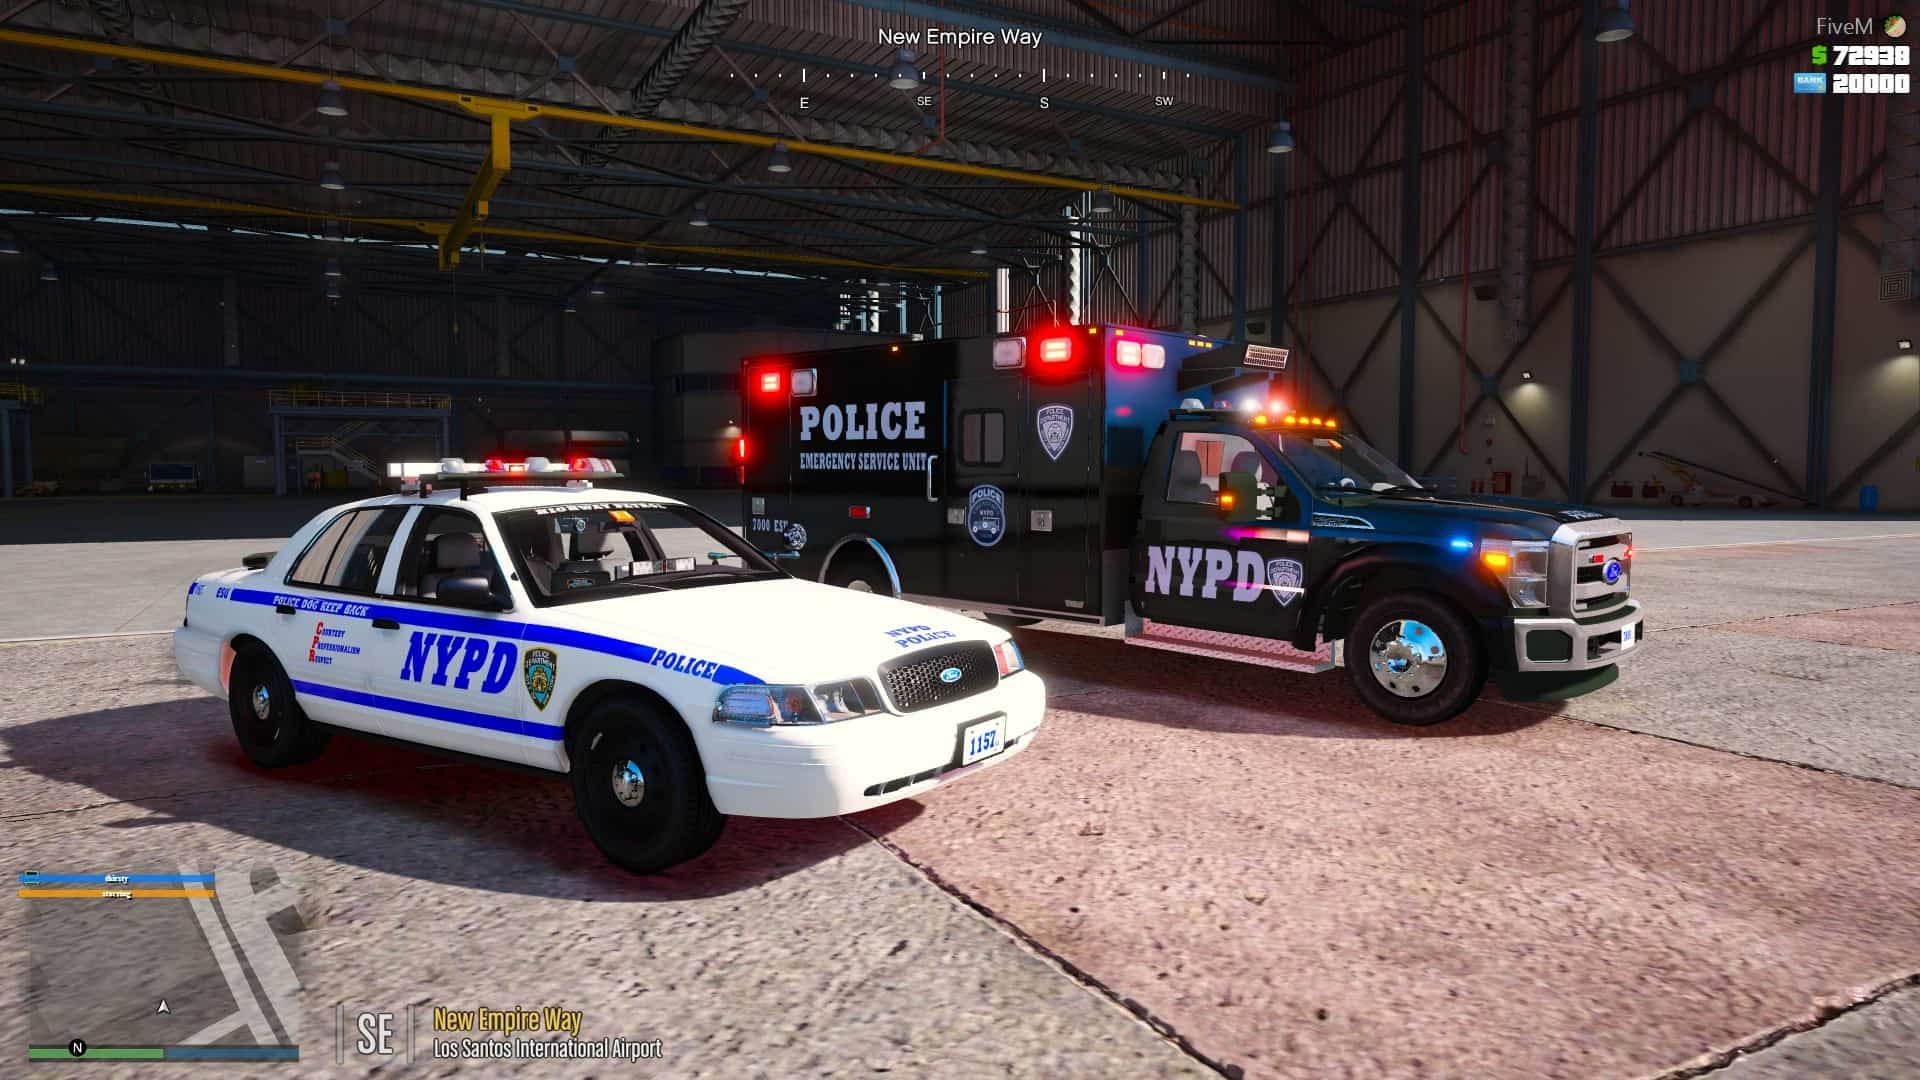 Nypd Vehicles Pack [add On Fivem] 4 2 B Nypd Pack Add On 5m Gta 5